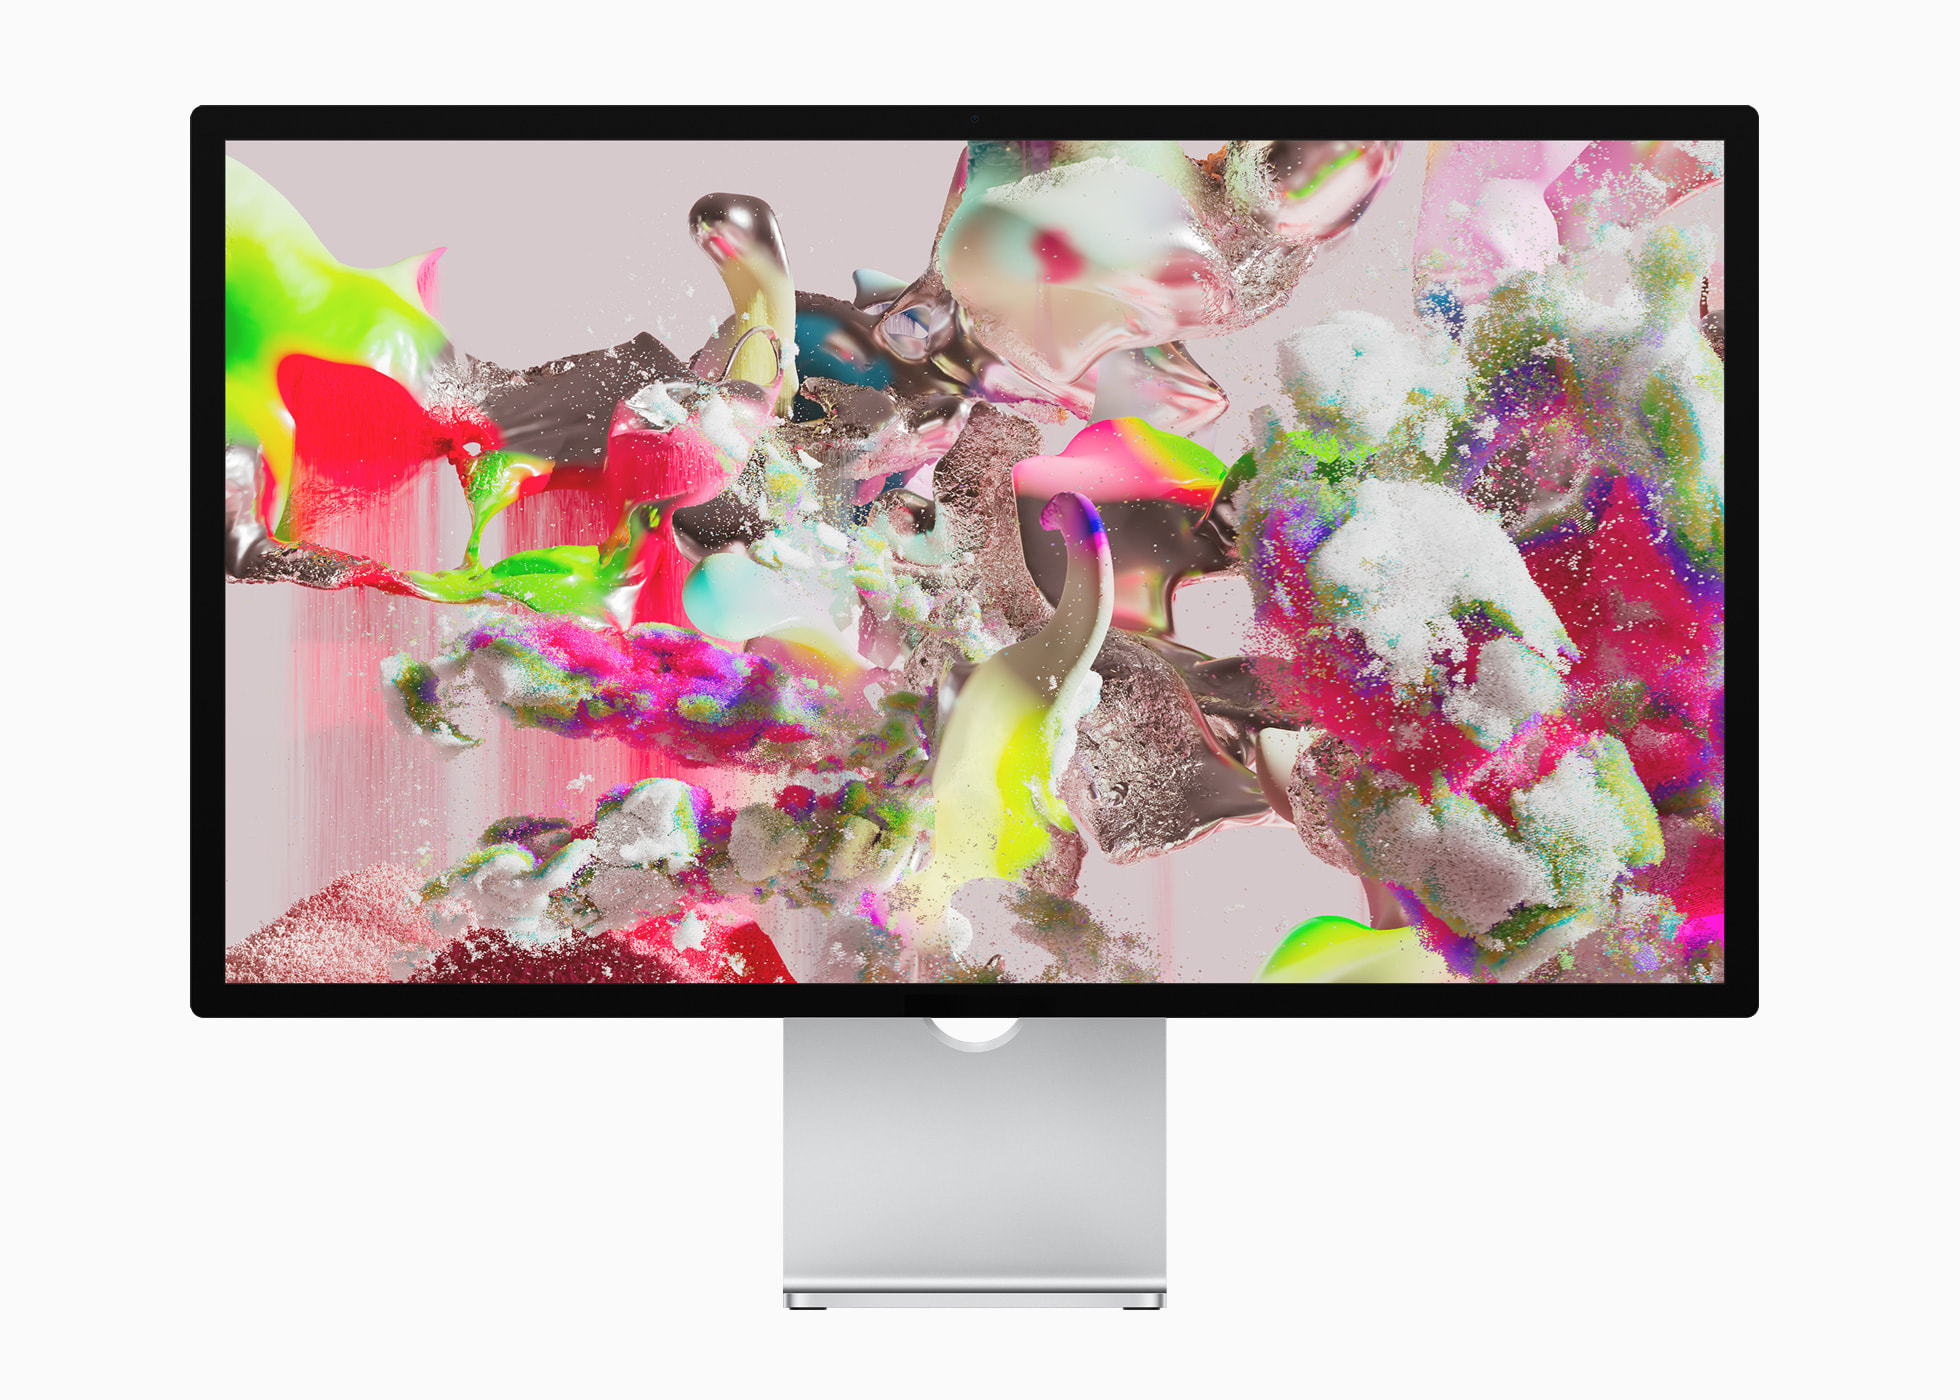 Exclusive This is Mac Studio and Apples new display coming at March 8  event  AppleTrack